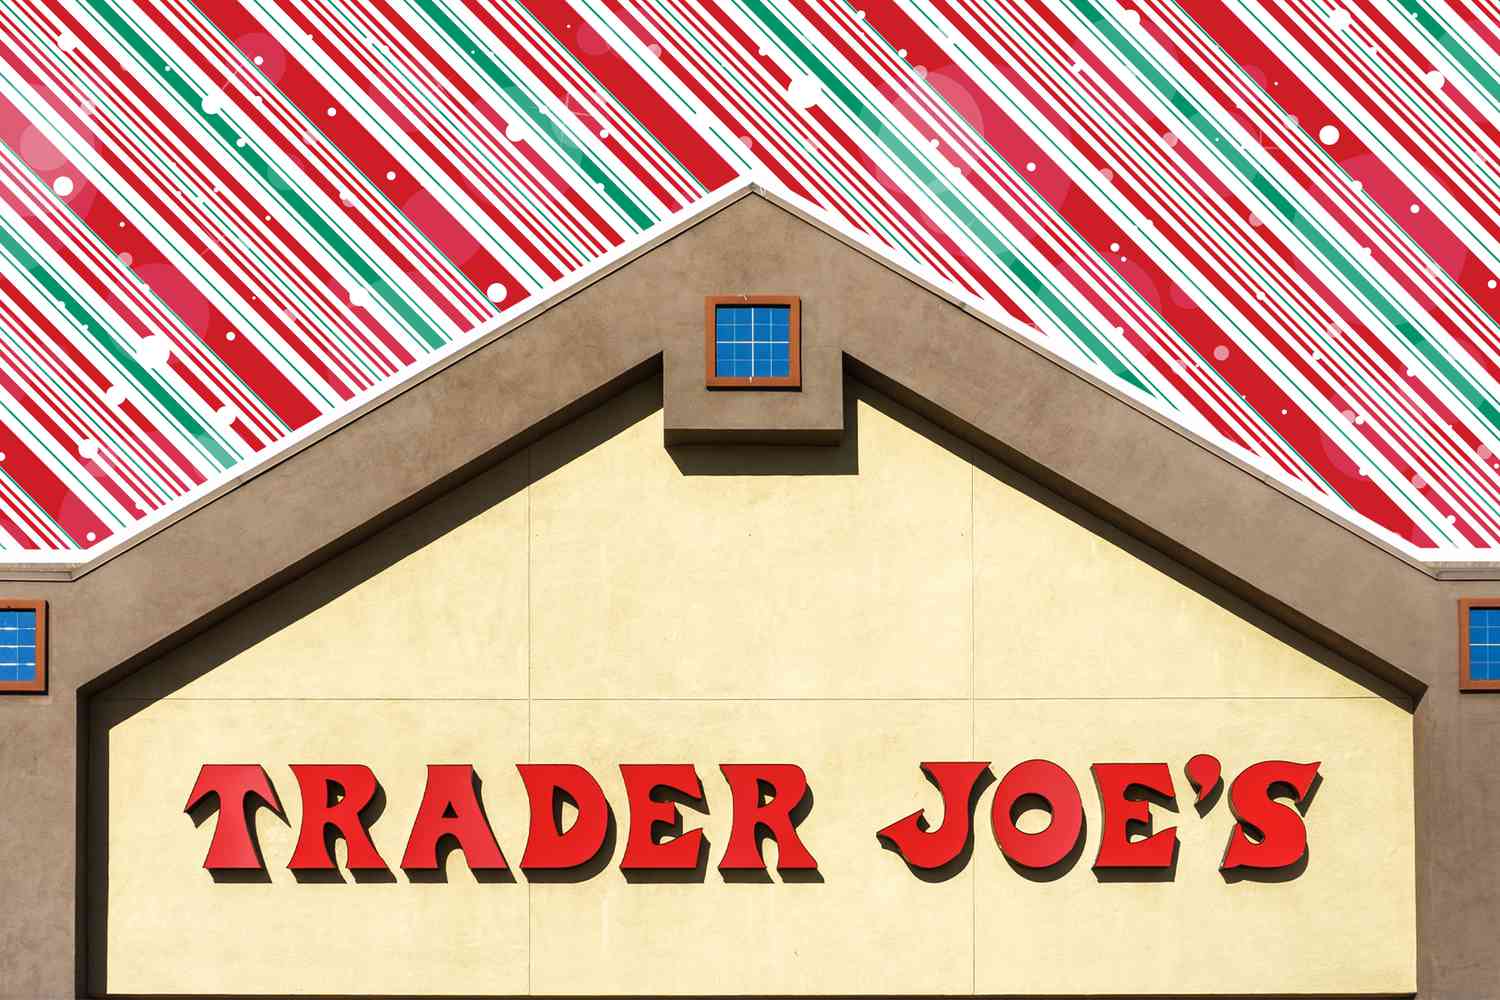 Trader Joe's storefront with a peppermint striped designed background